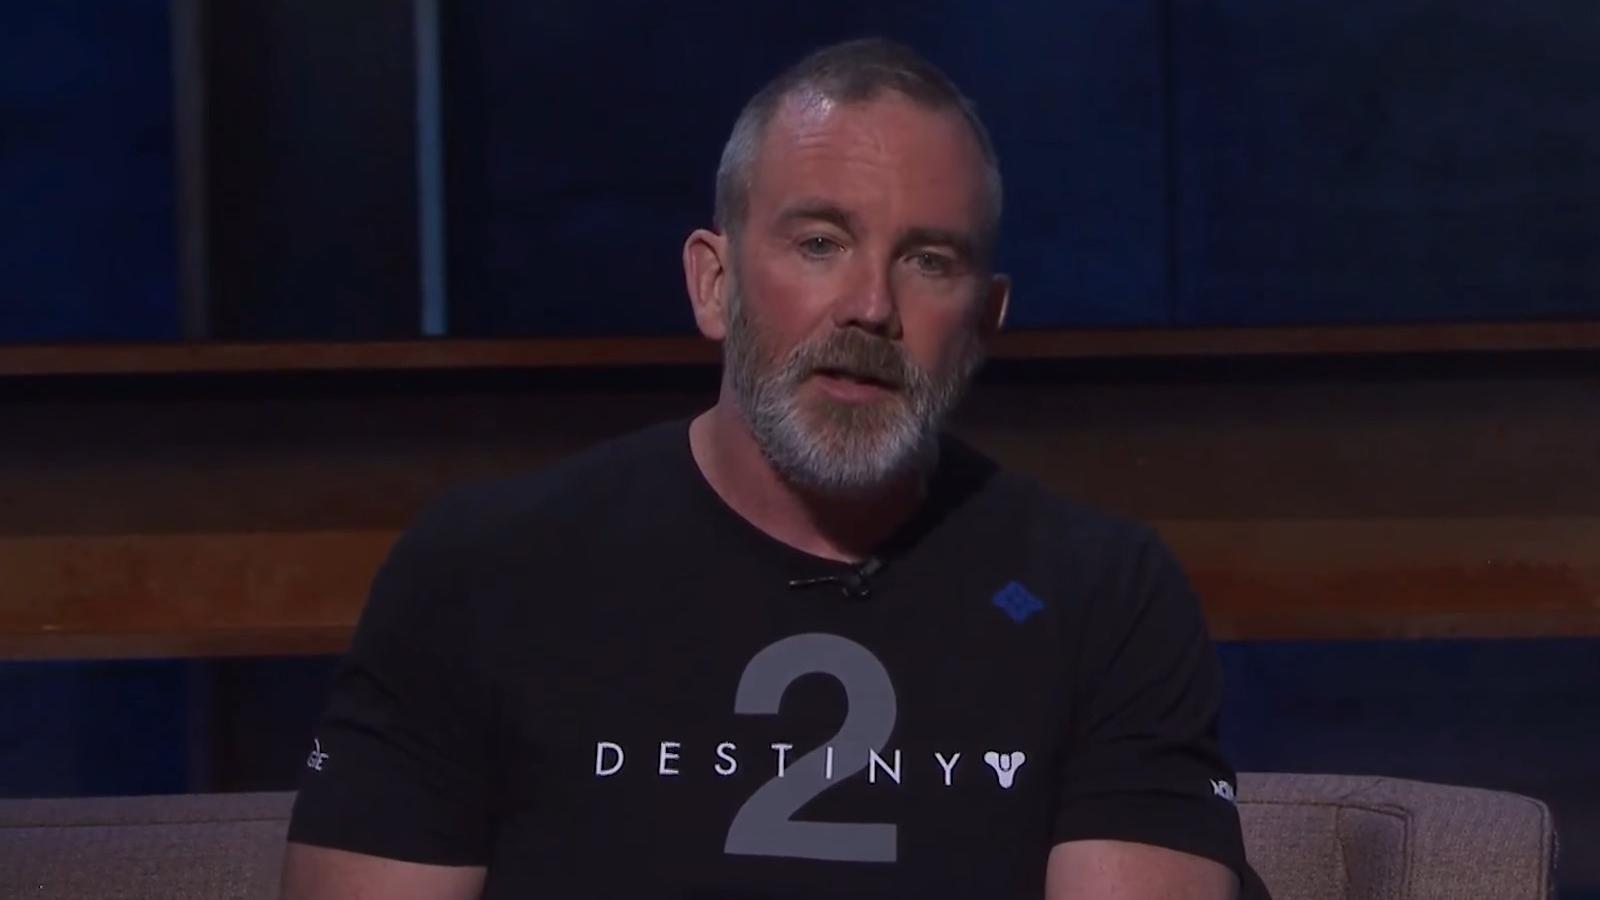 Bungie CEO Pete Parsons showing off new Destiny 2 Exotic weapon during E3 2017.